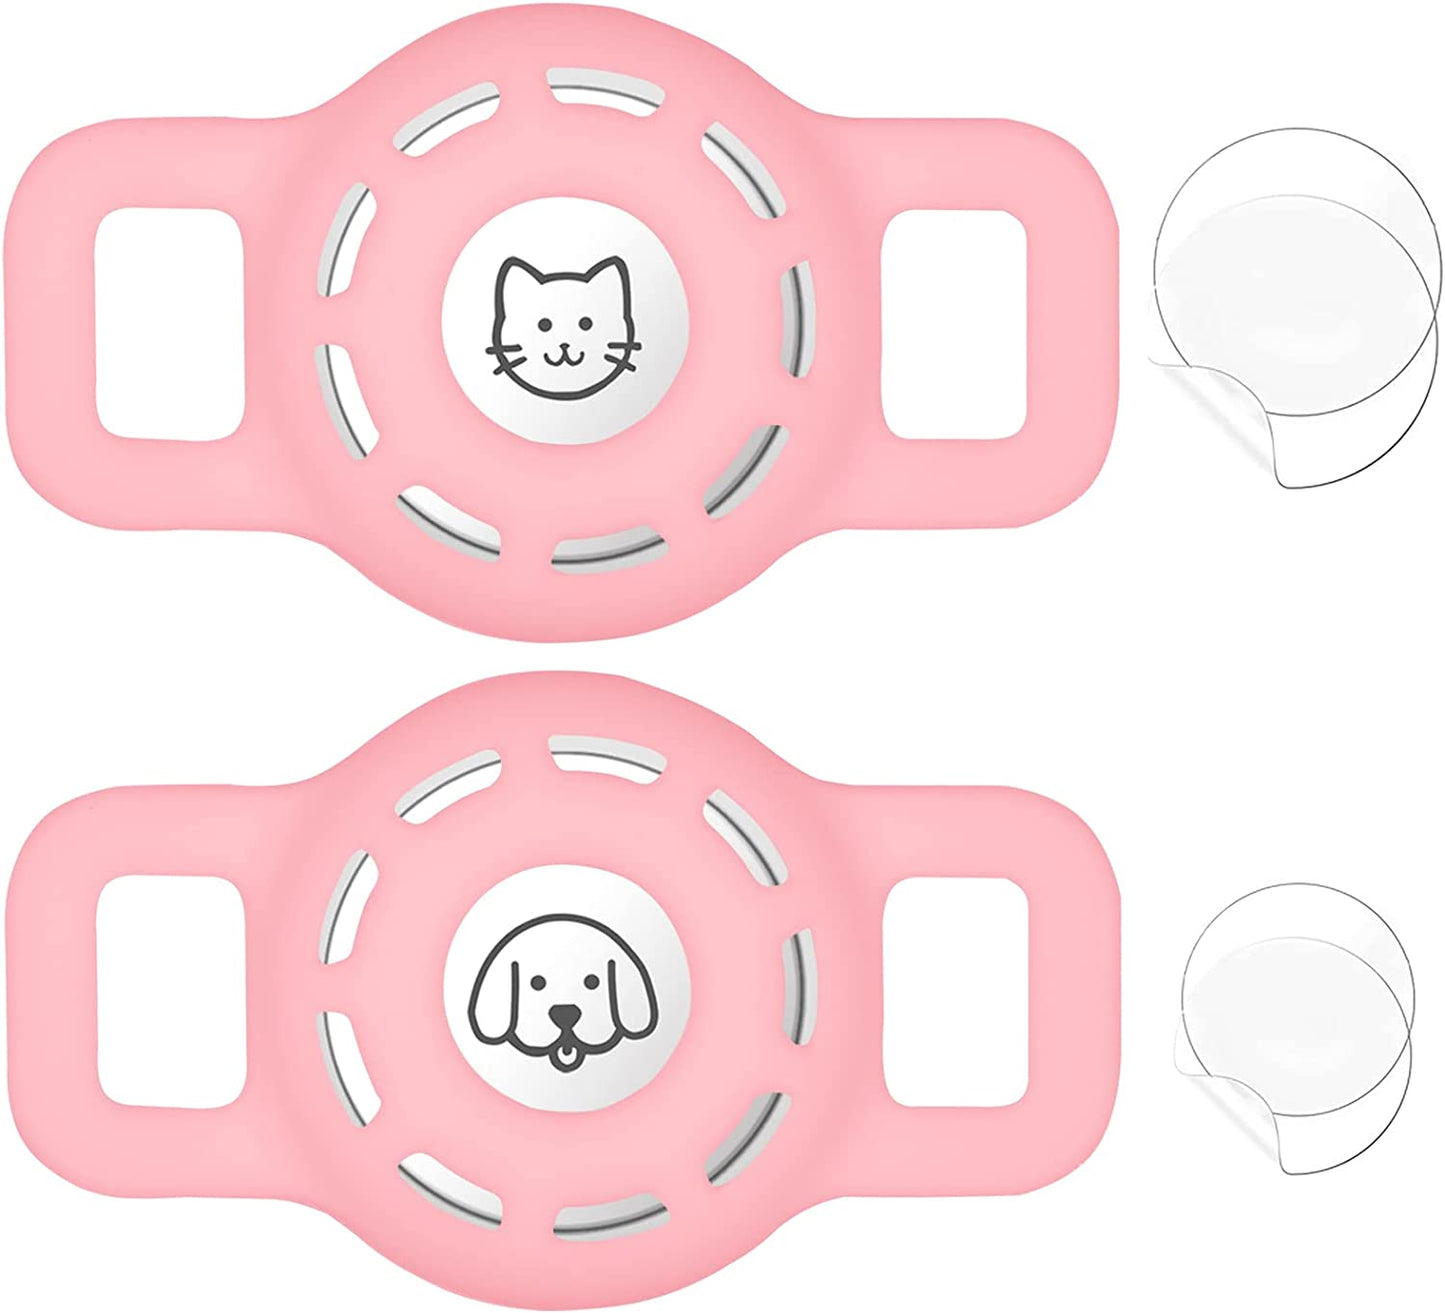 Airtag Cat Collar Holder for Apple Air Tag Cat Collar Holder within 0.6 Inch, Airtag Dog Collar Holder Small, 2 Pack Airtag Pet Collar Holder for Apple Airtag Collar and 2 Pack Airtag Protector